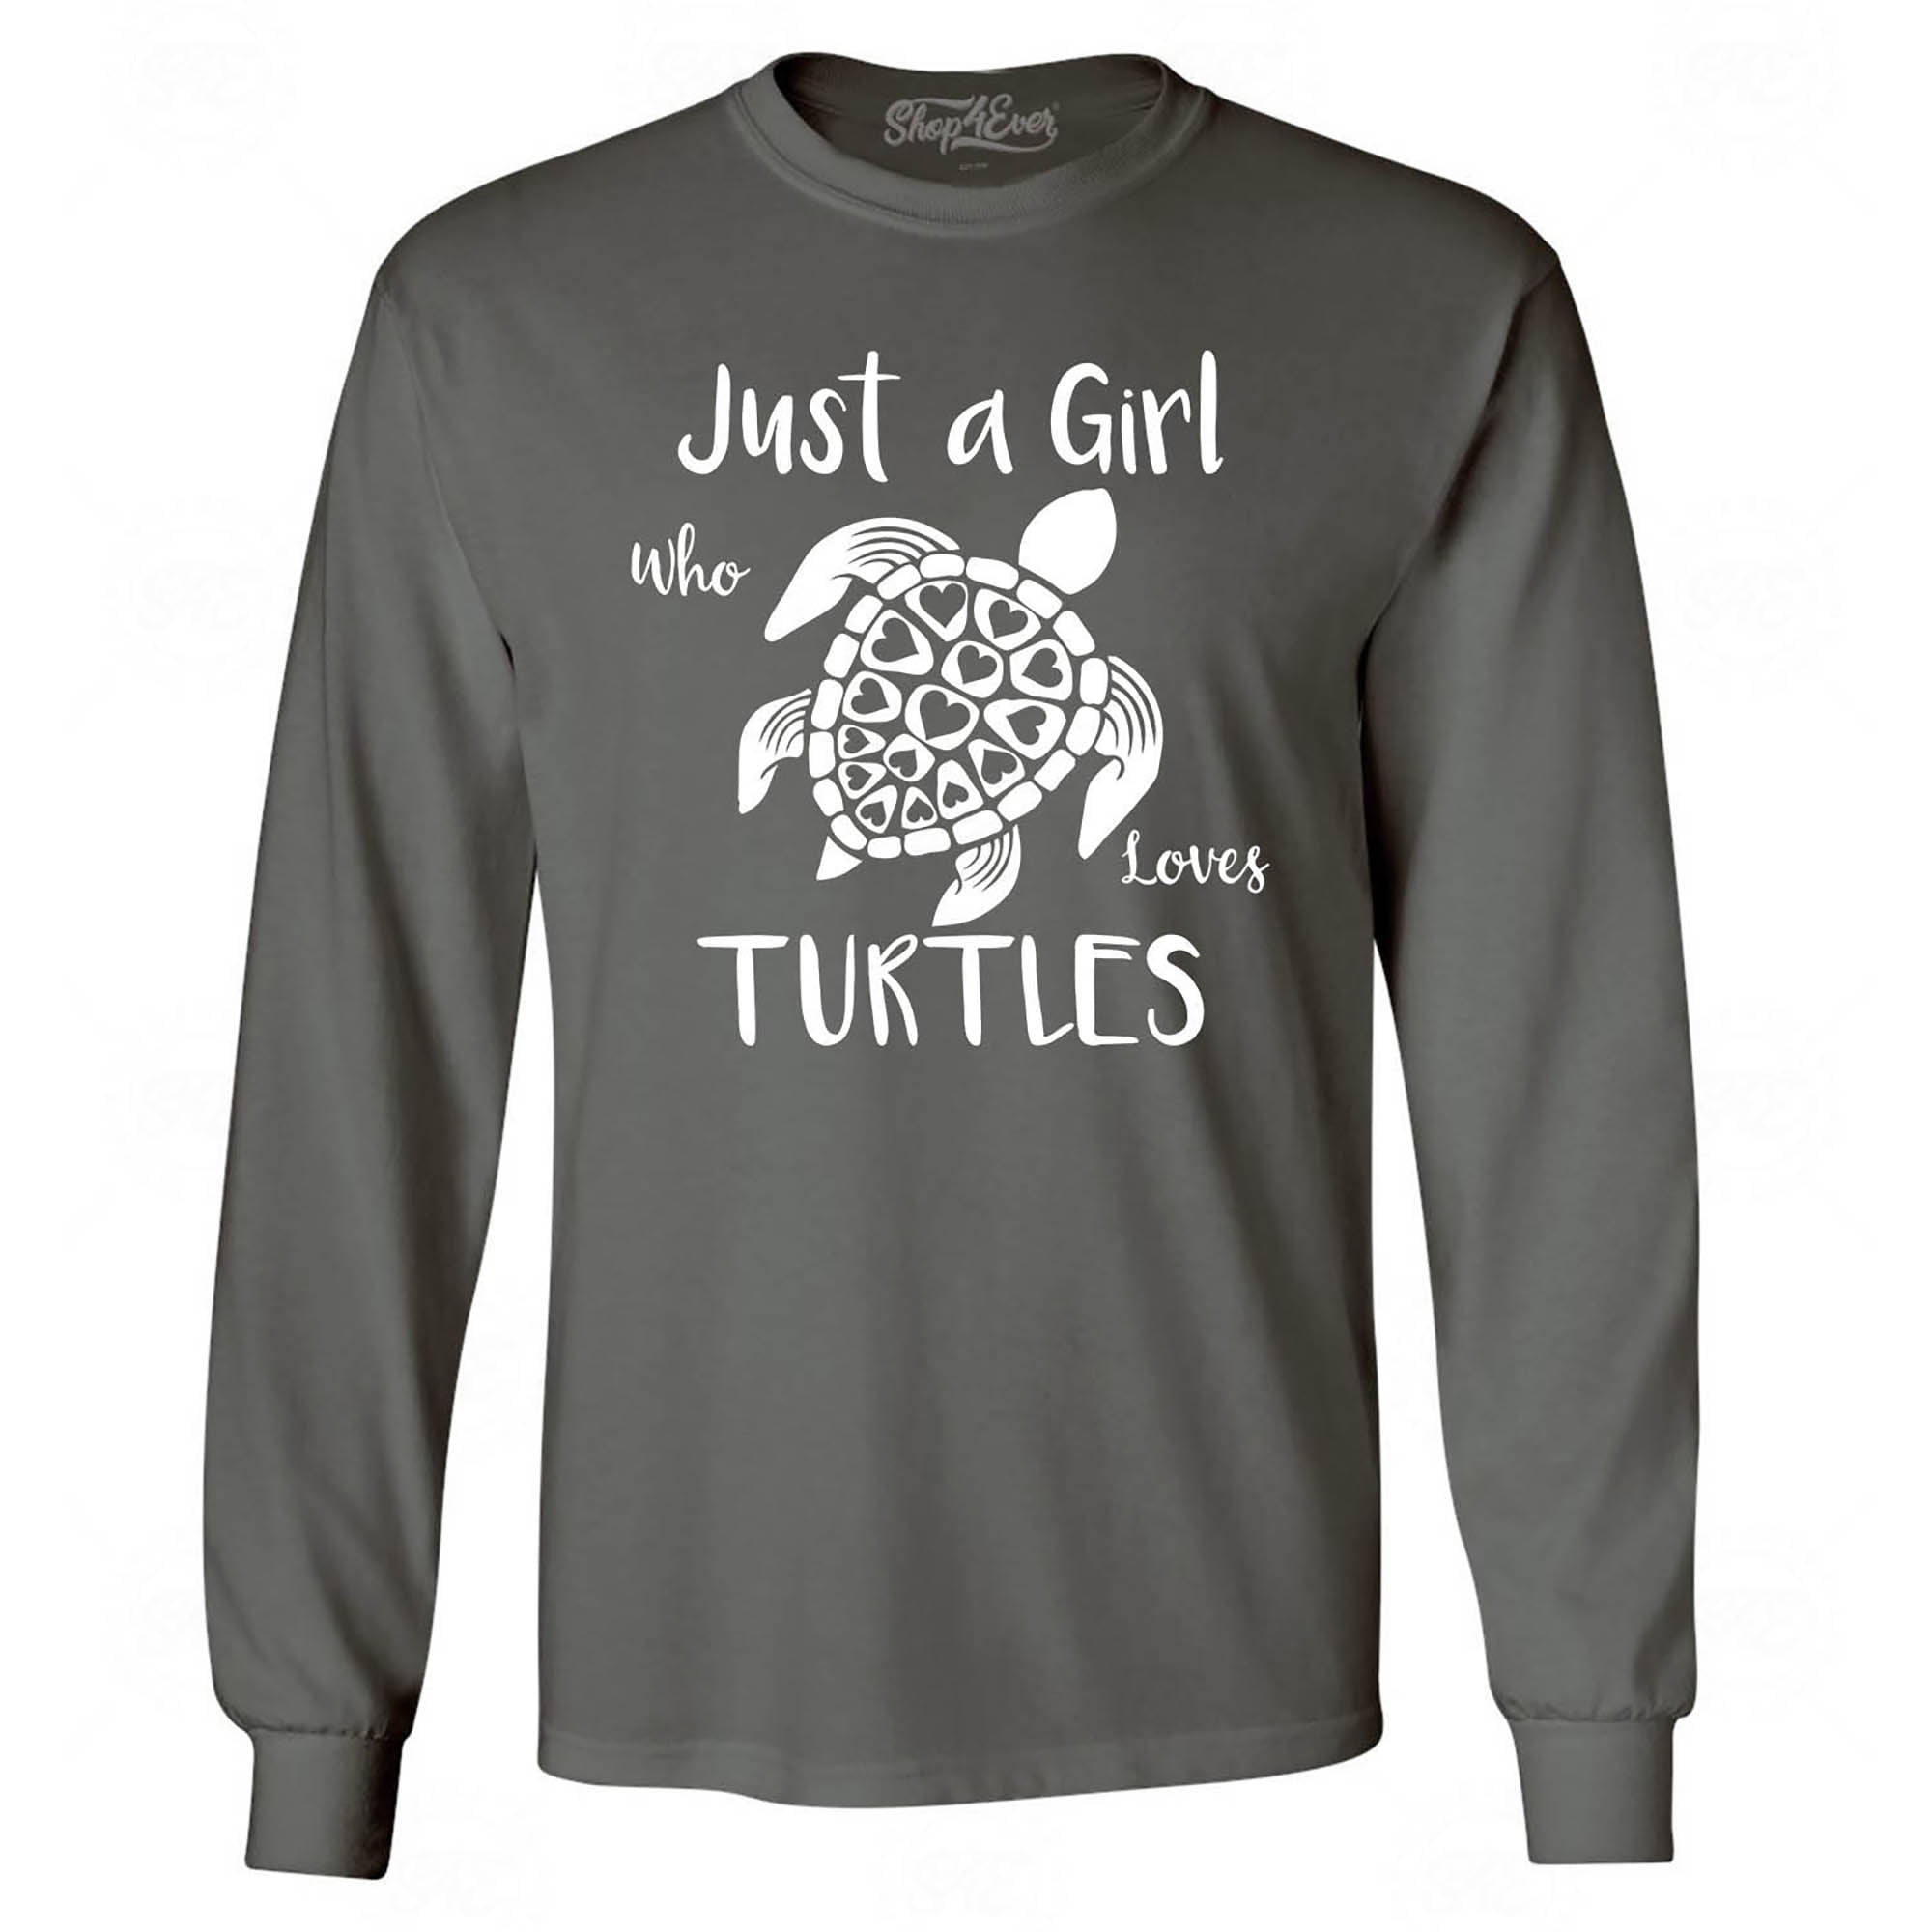 Just A Girl Who Loves Turtles Long Sleeve Shirt